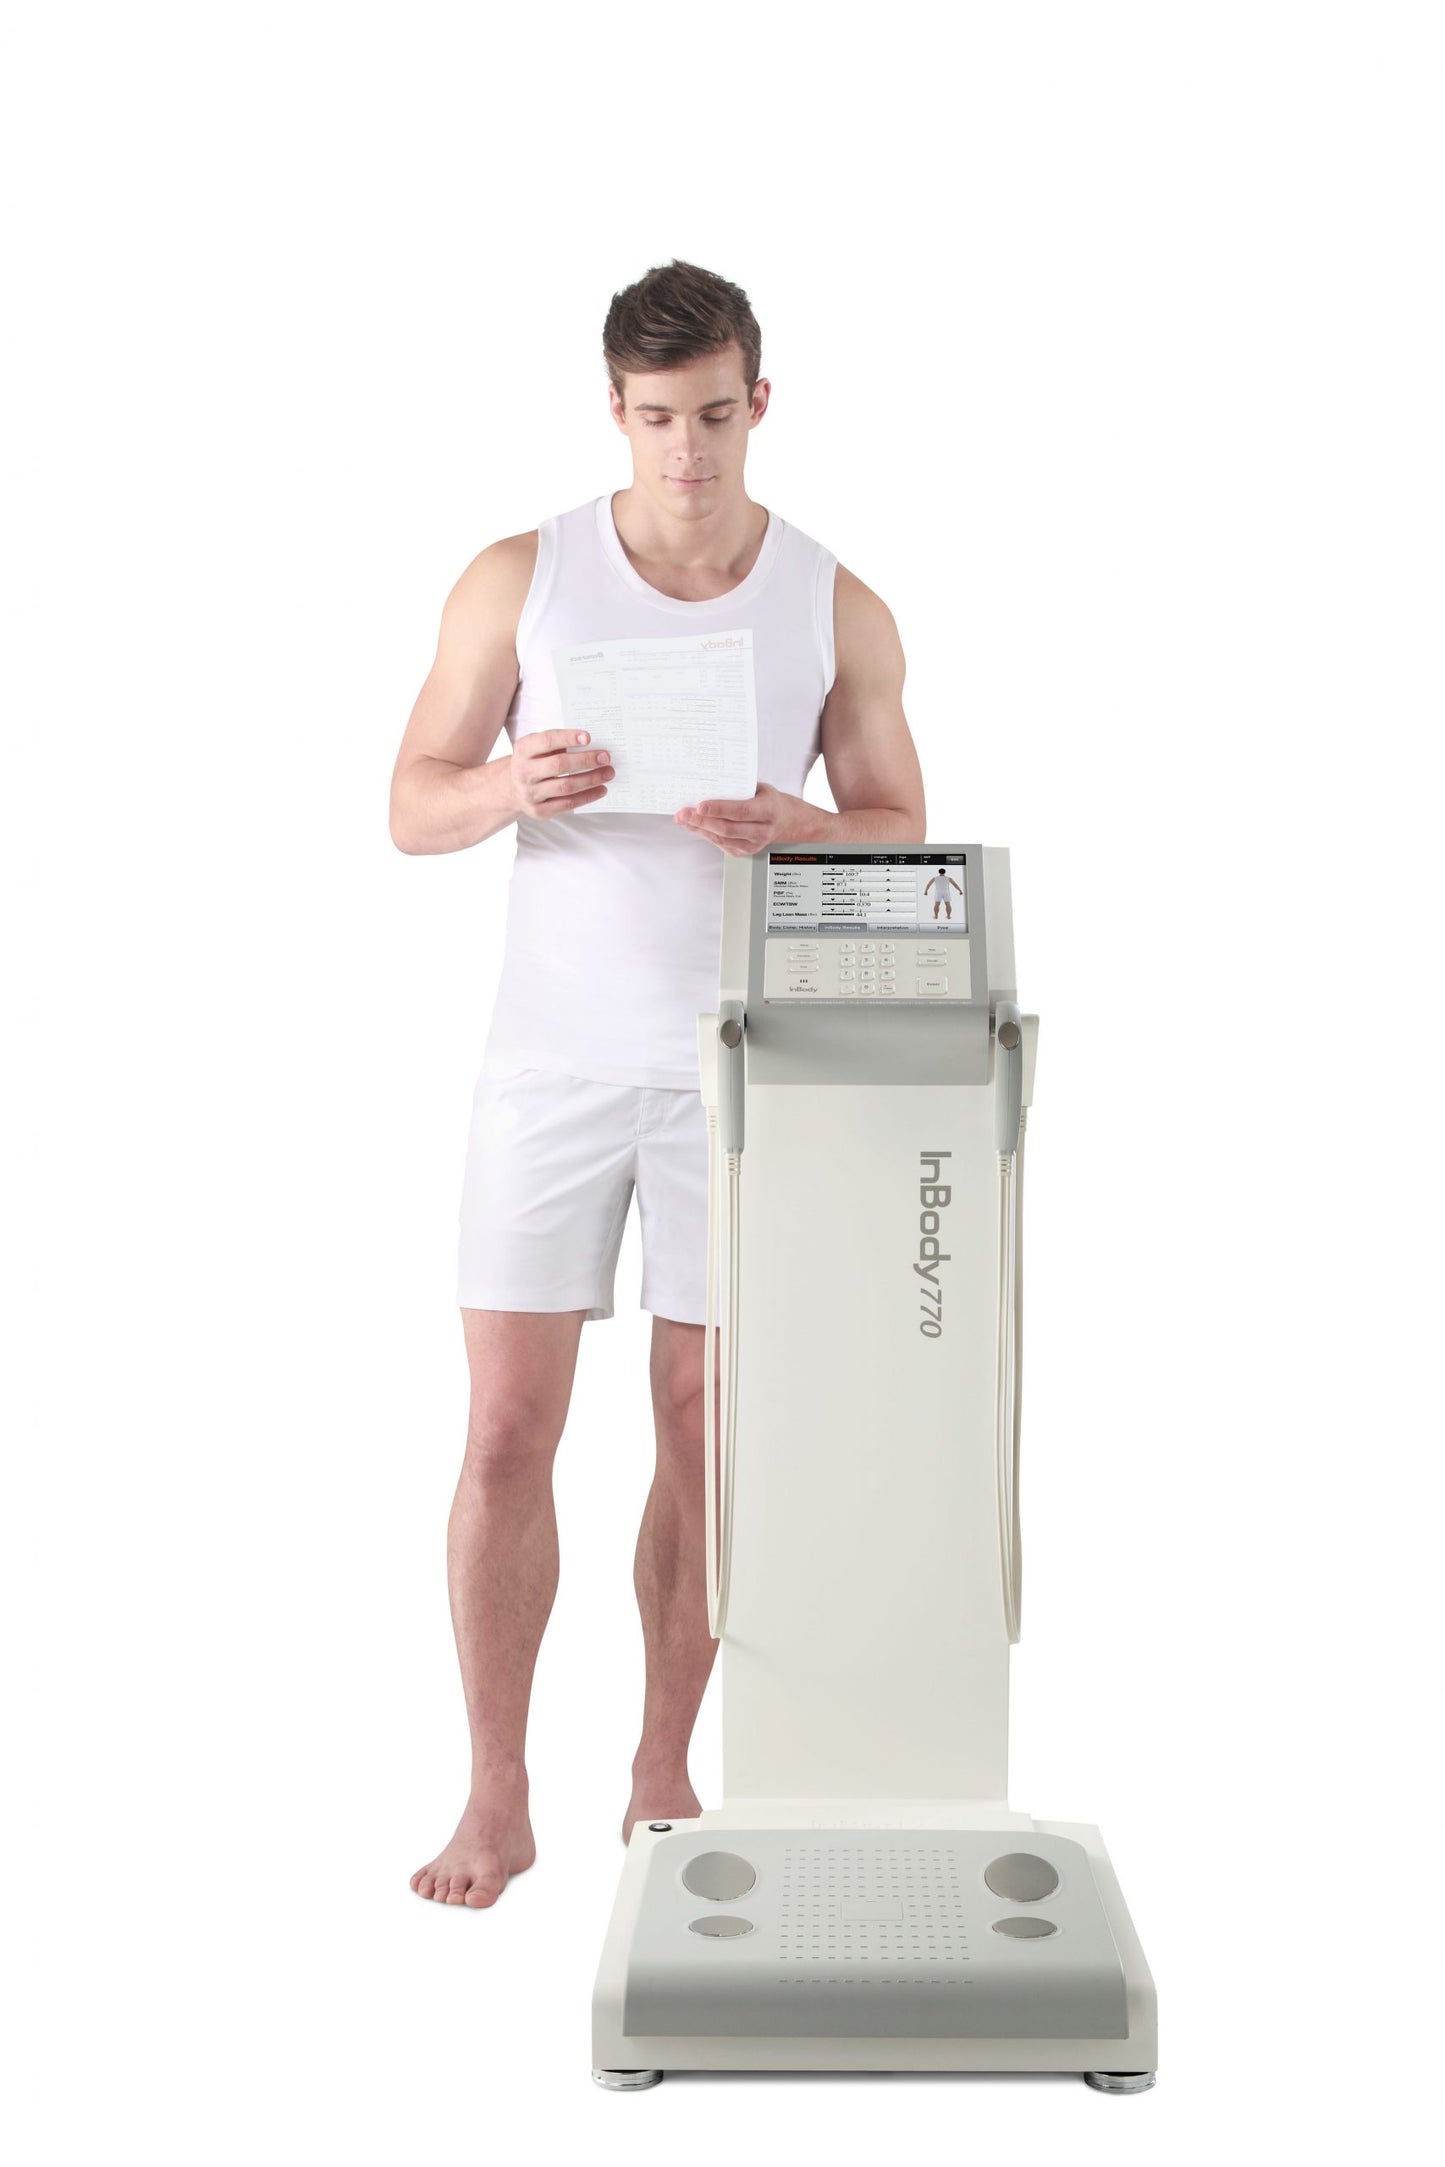 InBody 770 Ultimate Body Composition Analyser